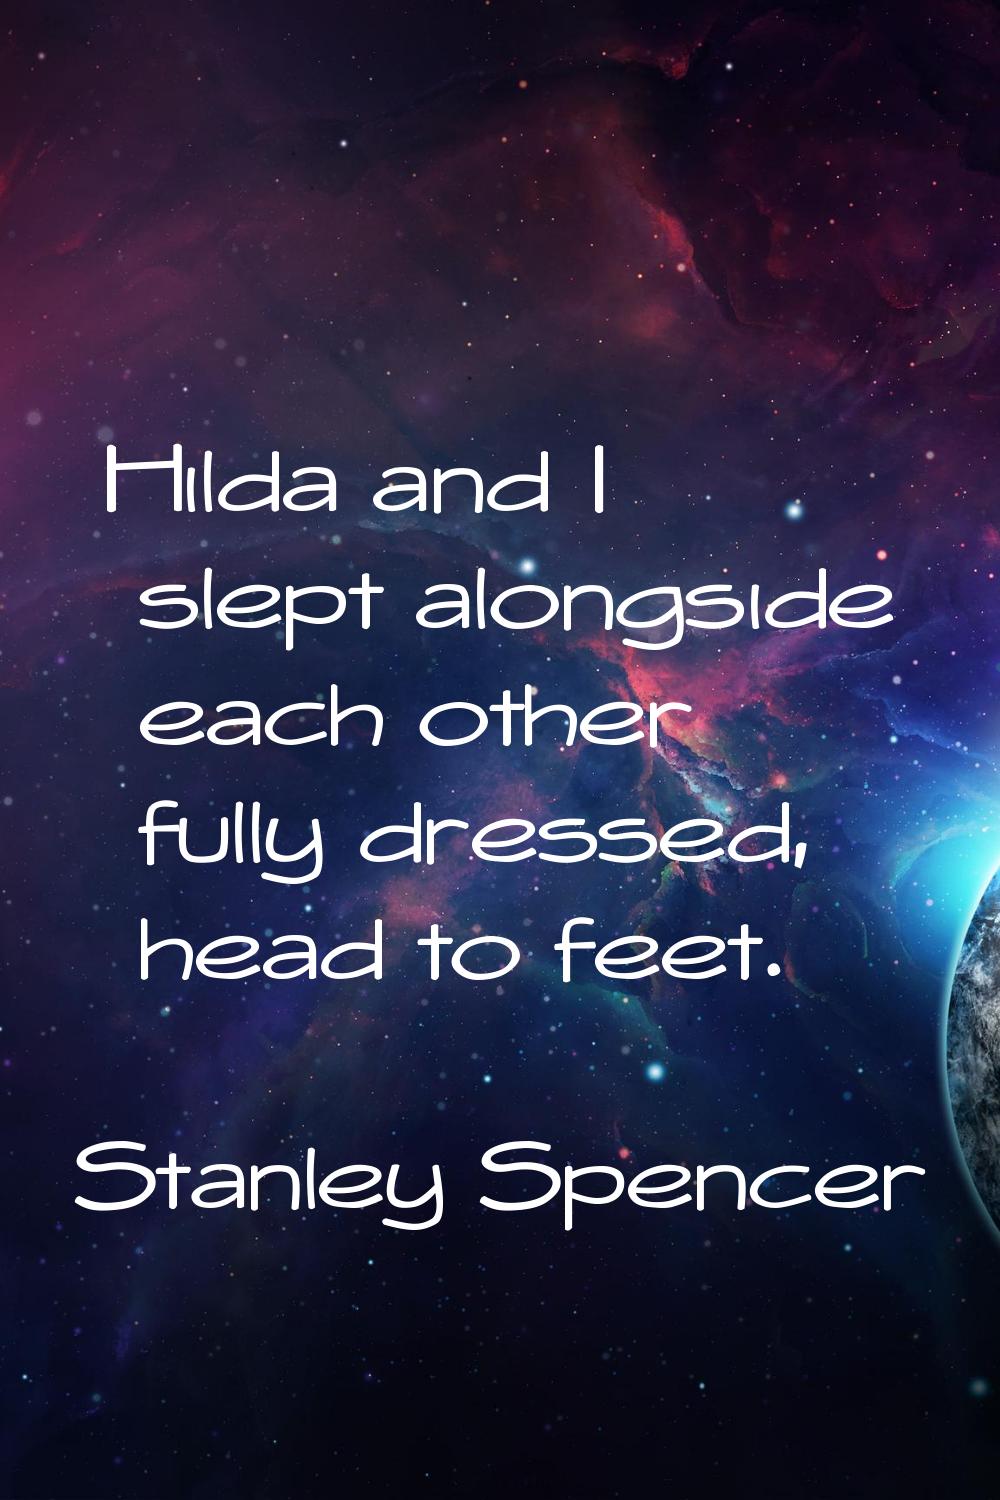 Hilda and I slept alongside each other fully dressed, head to feet.